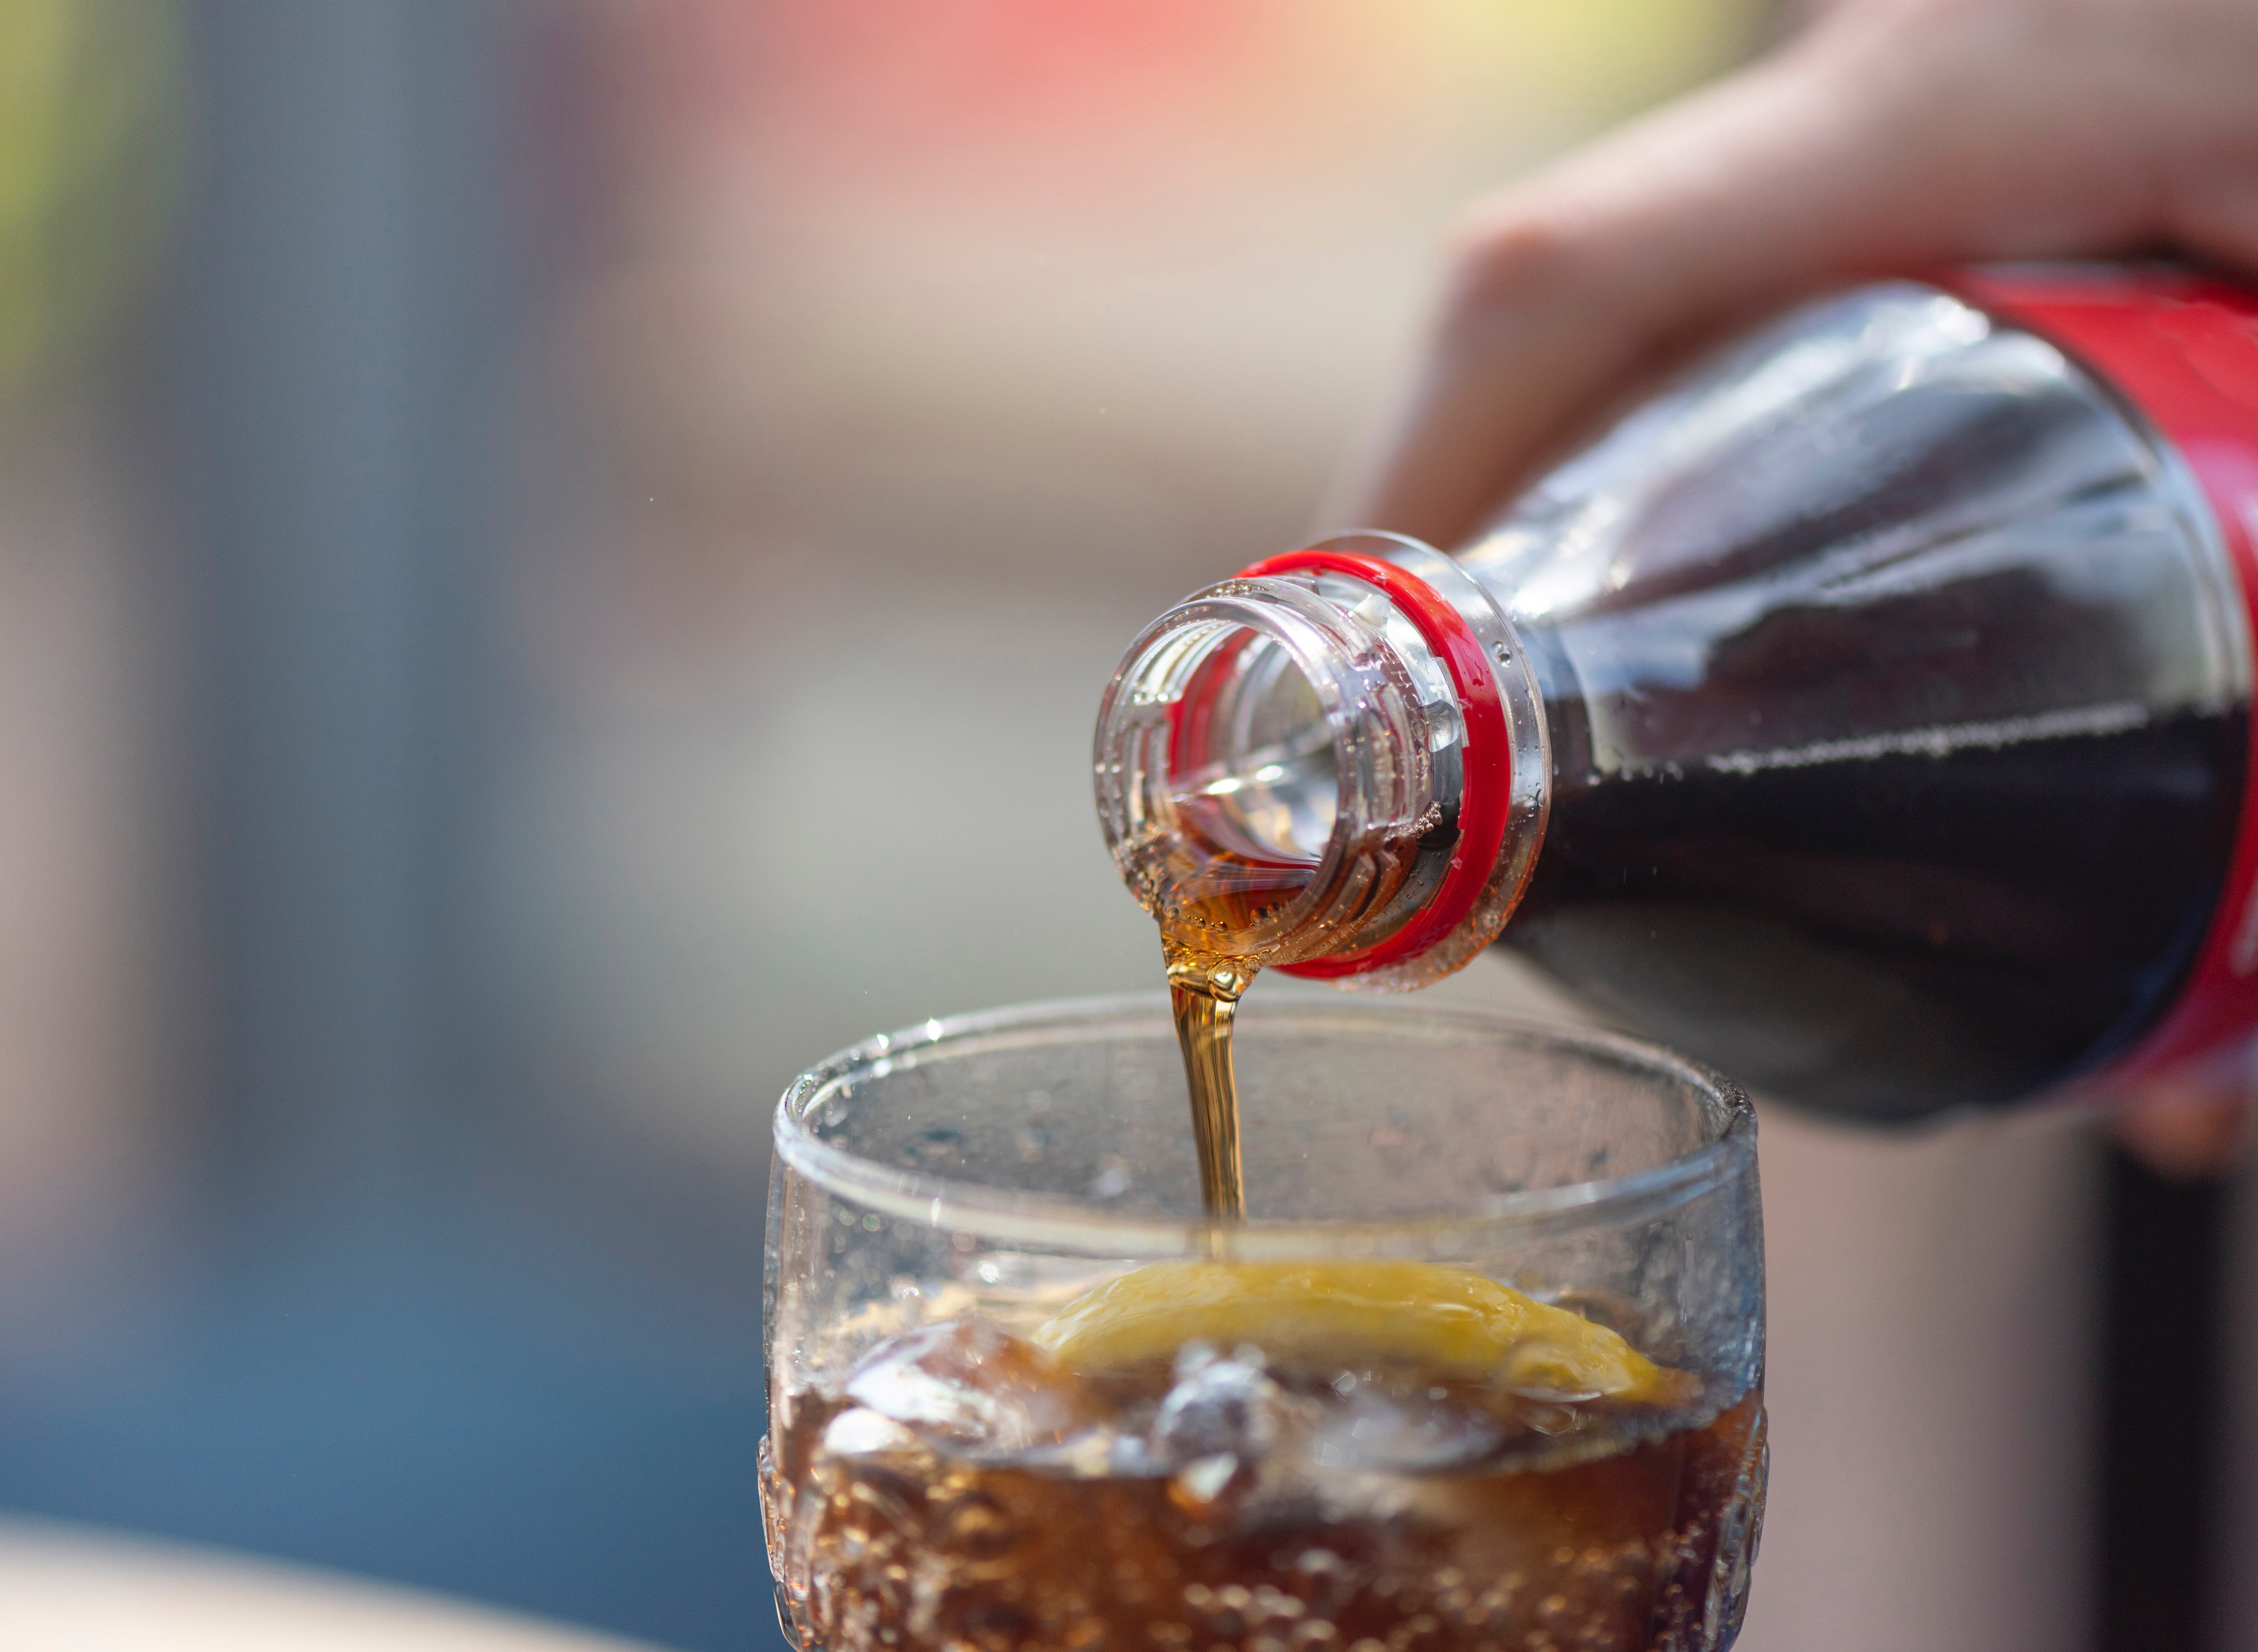 A Coke being poured from a plastic bottle into a glass with ice.